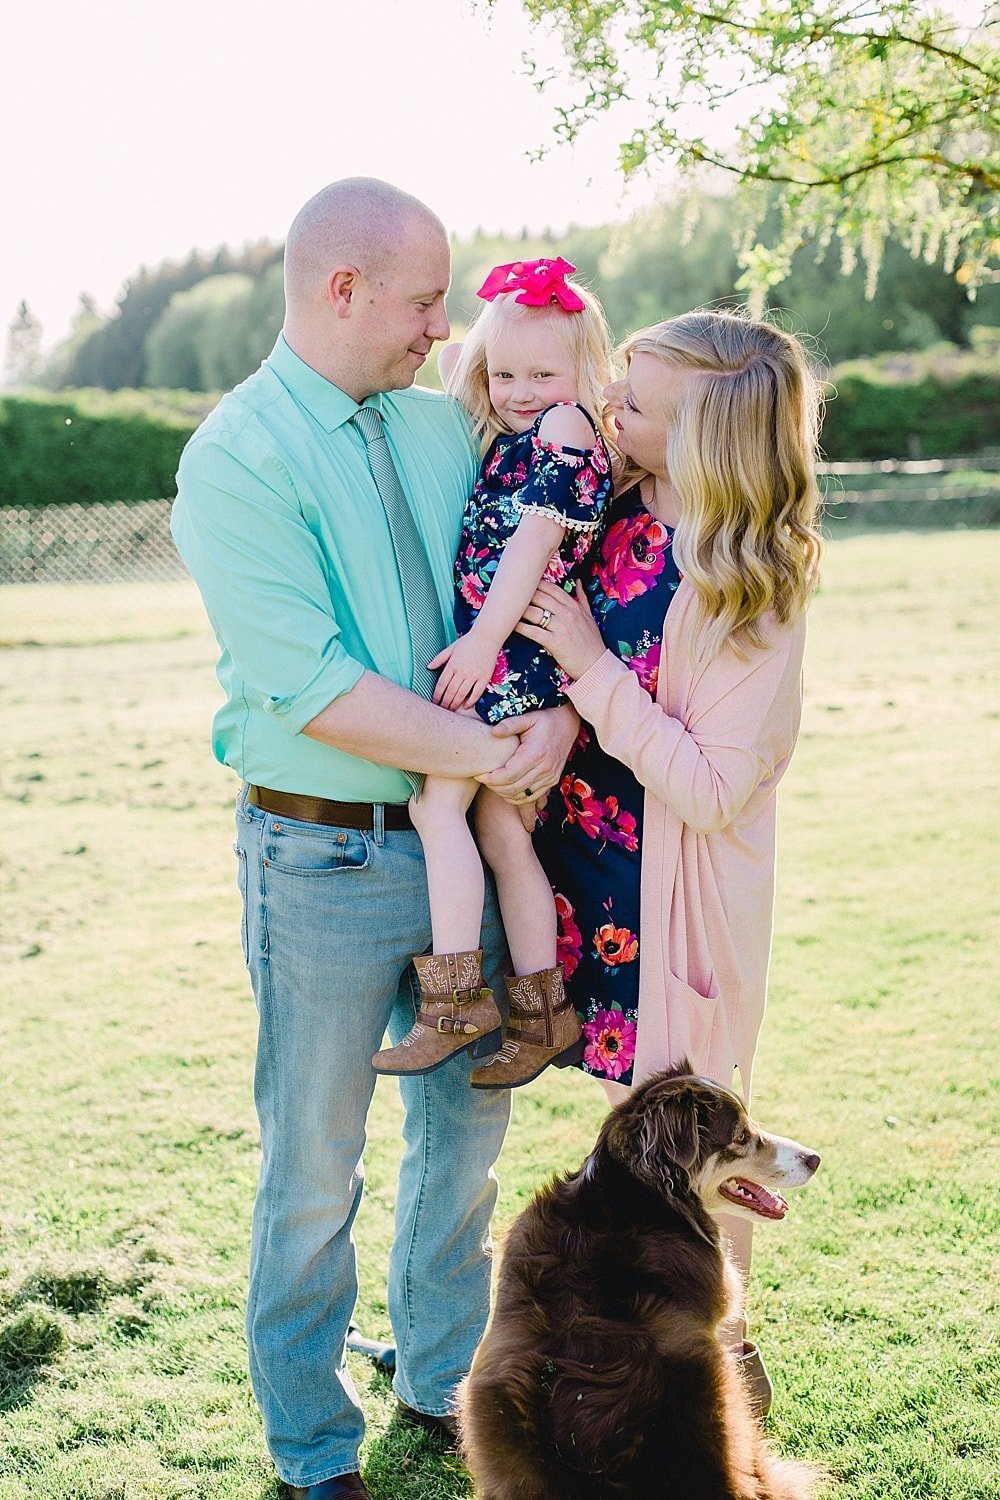 Houston family photography session photographed by Alicia Yarrish Photography